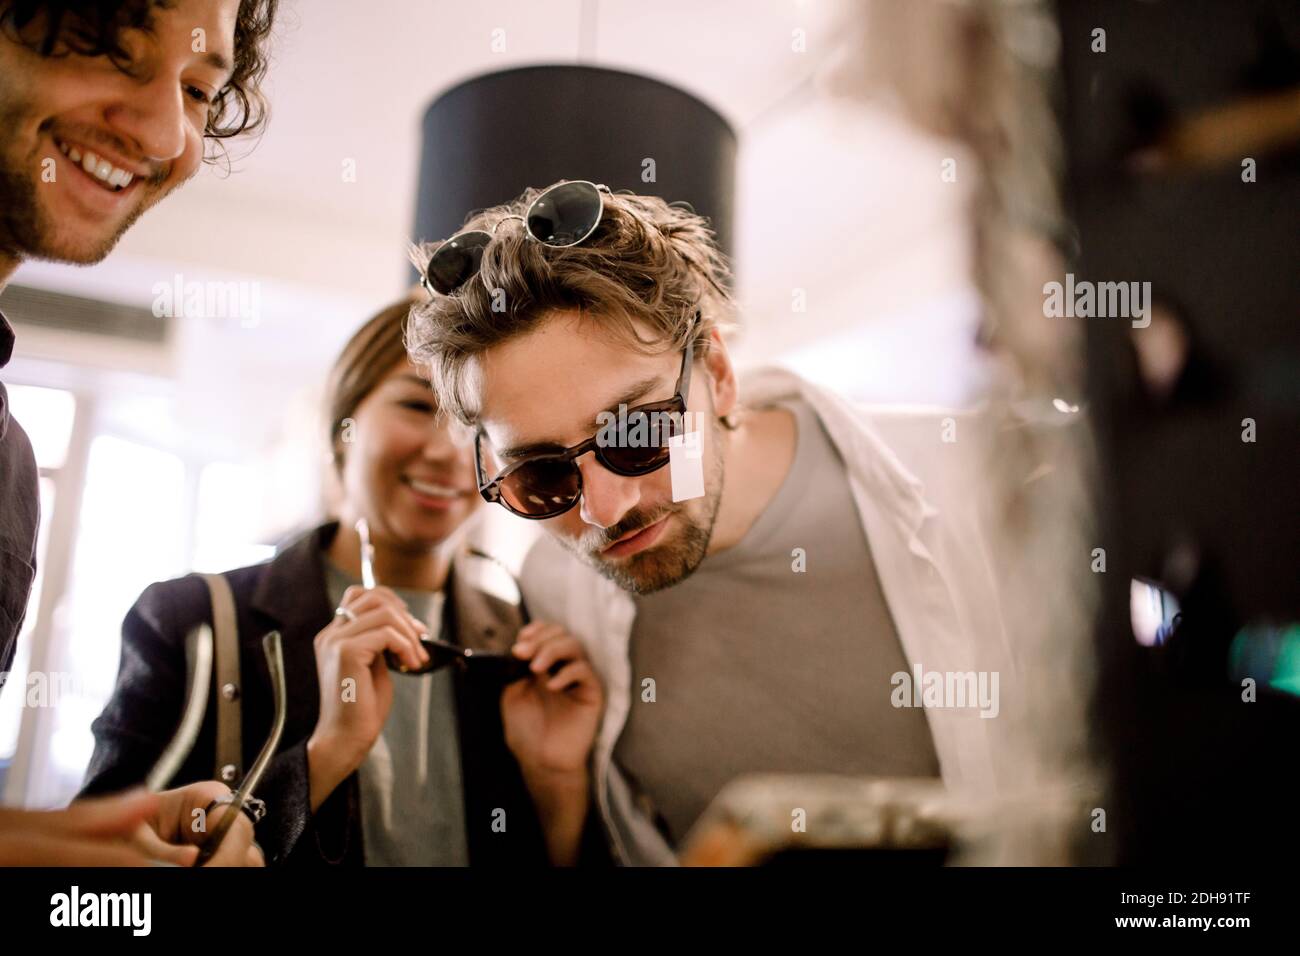 Smiling man trying fashionable eyeglasses with friends at store Stock Photo